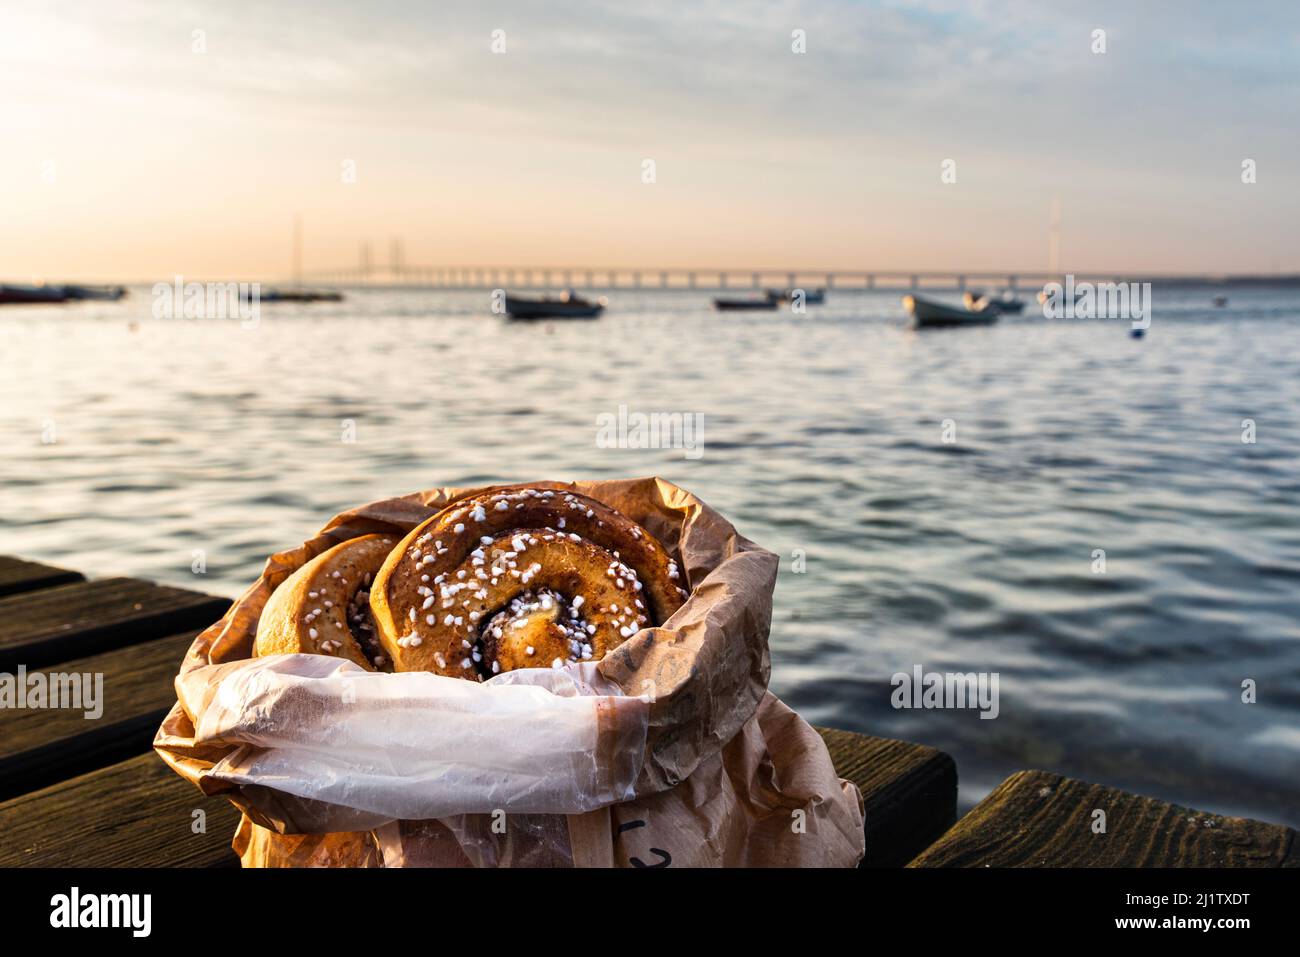 Cinnamon roll on a wooden boardwalk by the ocean at dusk with the Oresund Bridge. Cosy Swedish fika by the sea at sunset, typical Scandinavian pastry Stock Photo